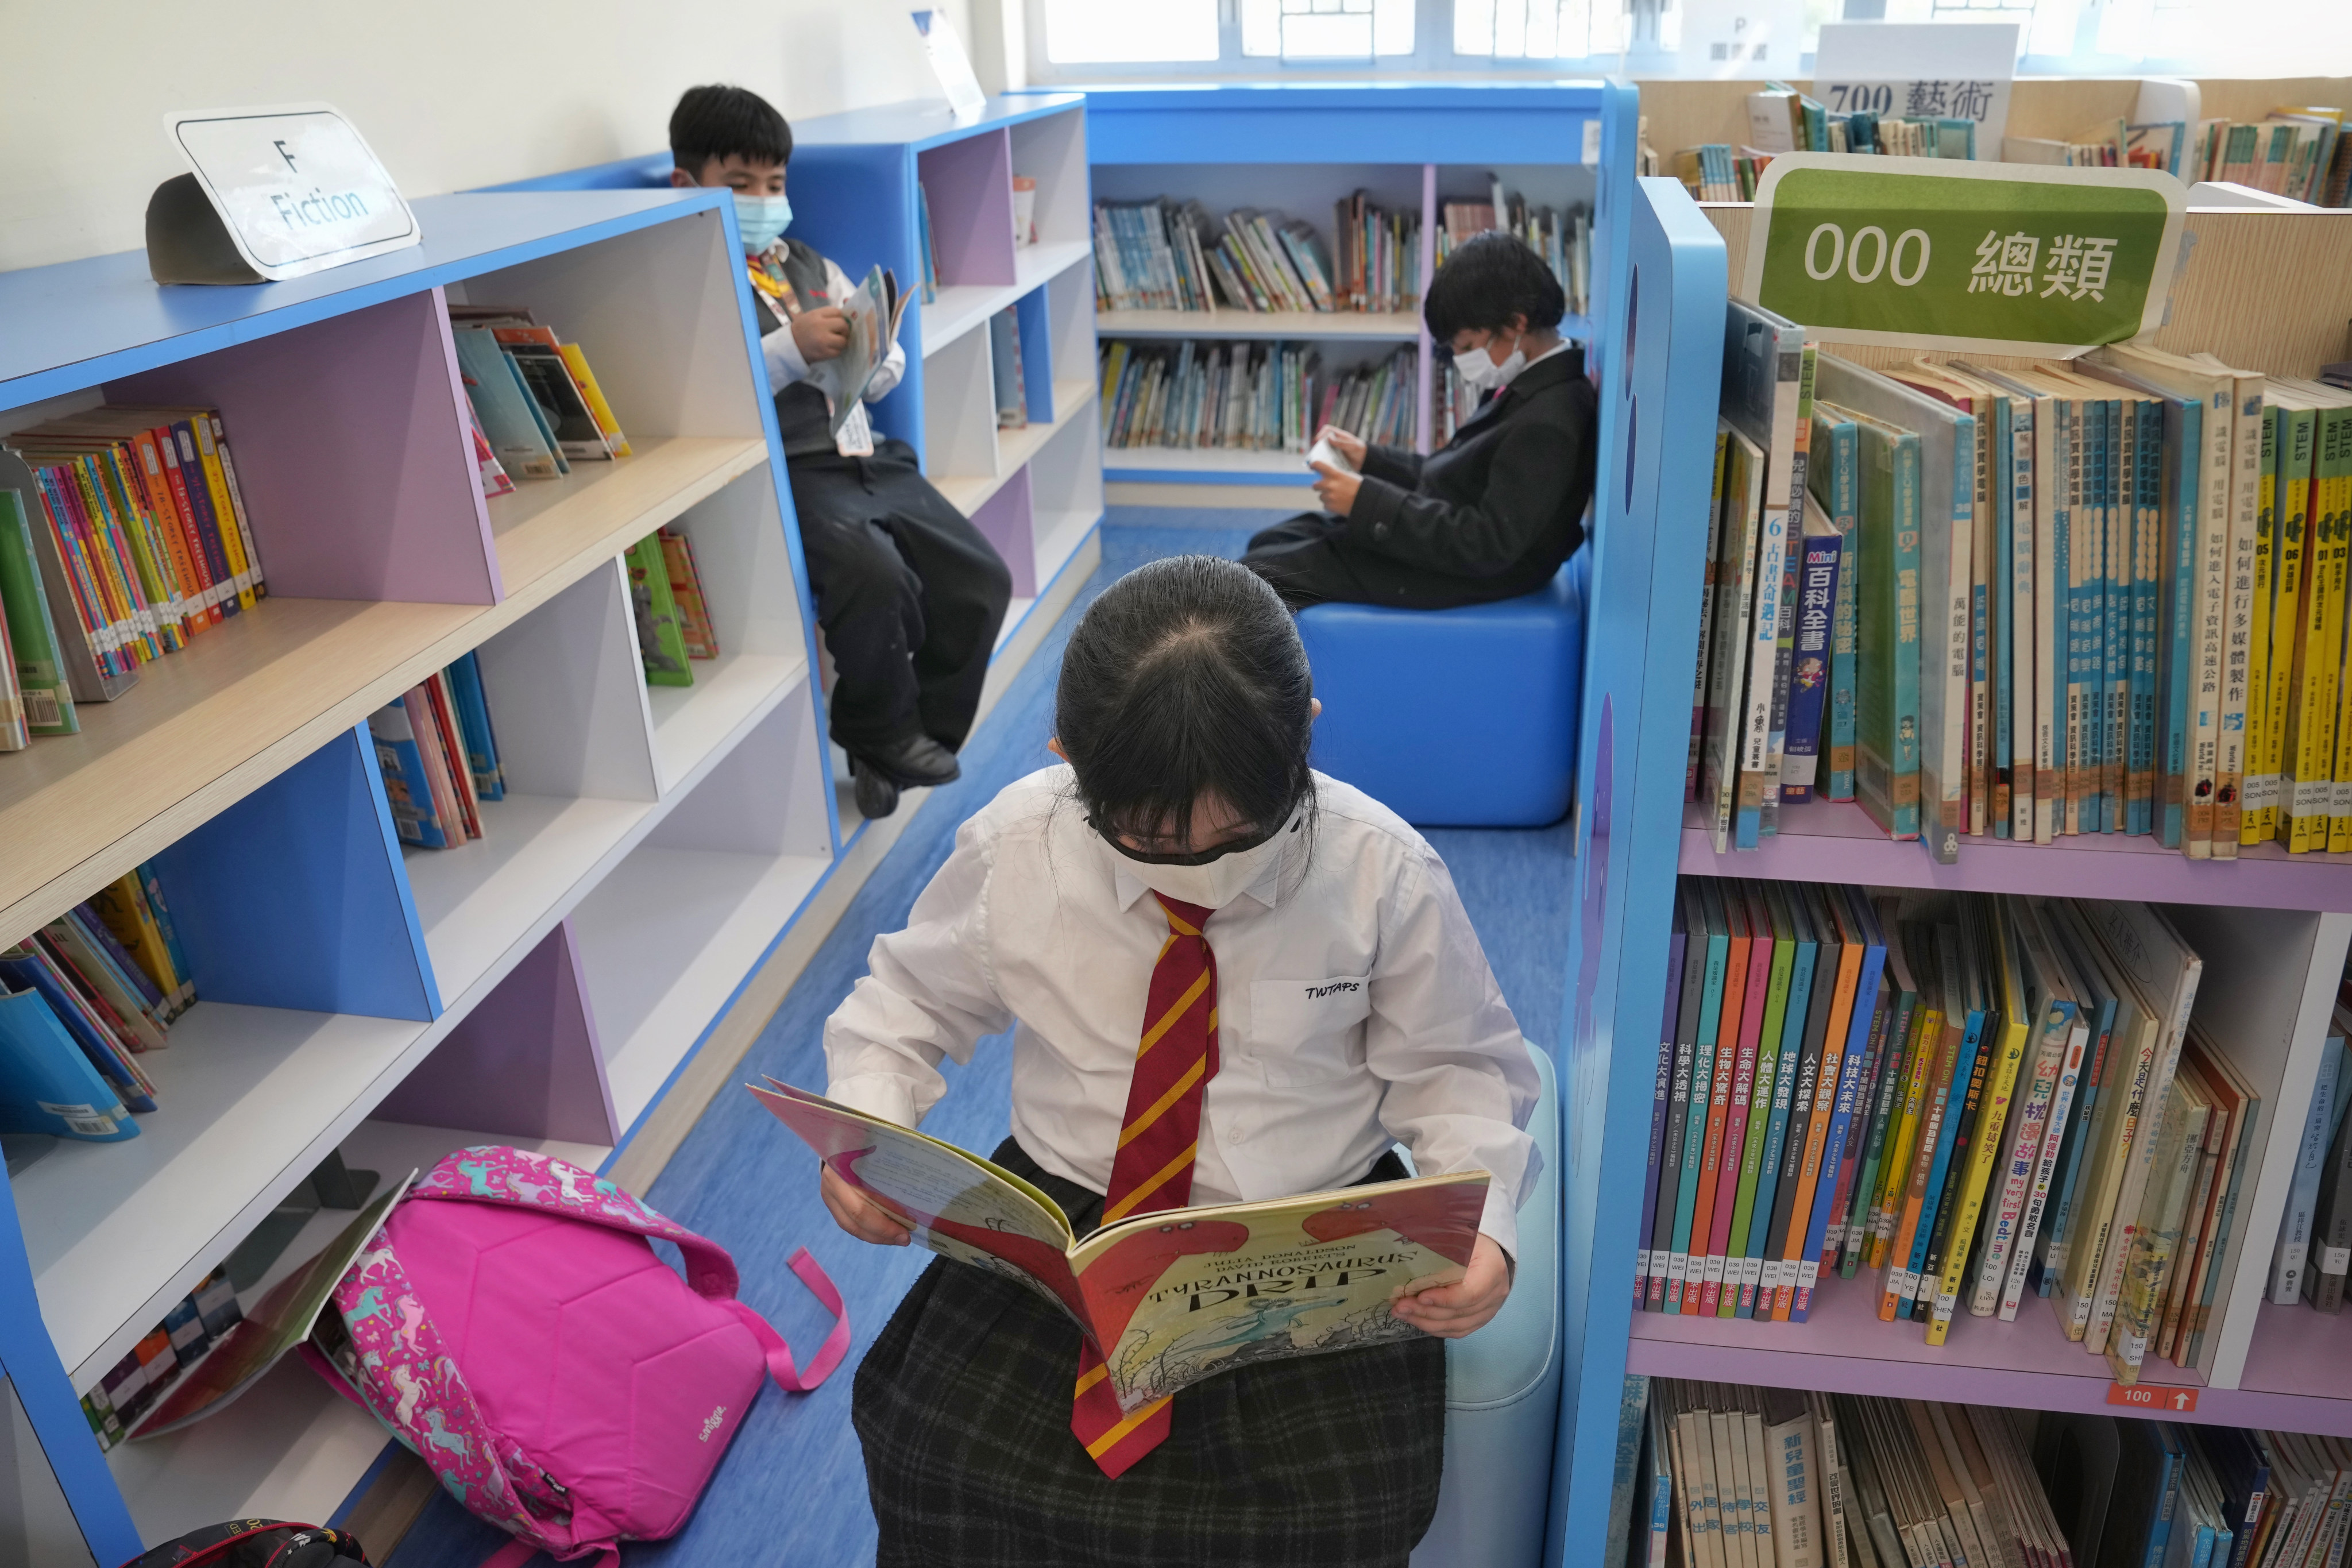 In the survey, Hong Kong students have expressed a desire for a wider variety of books in their schools. Photo: Elson Li